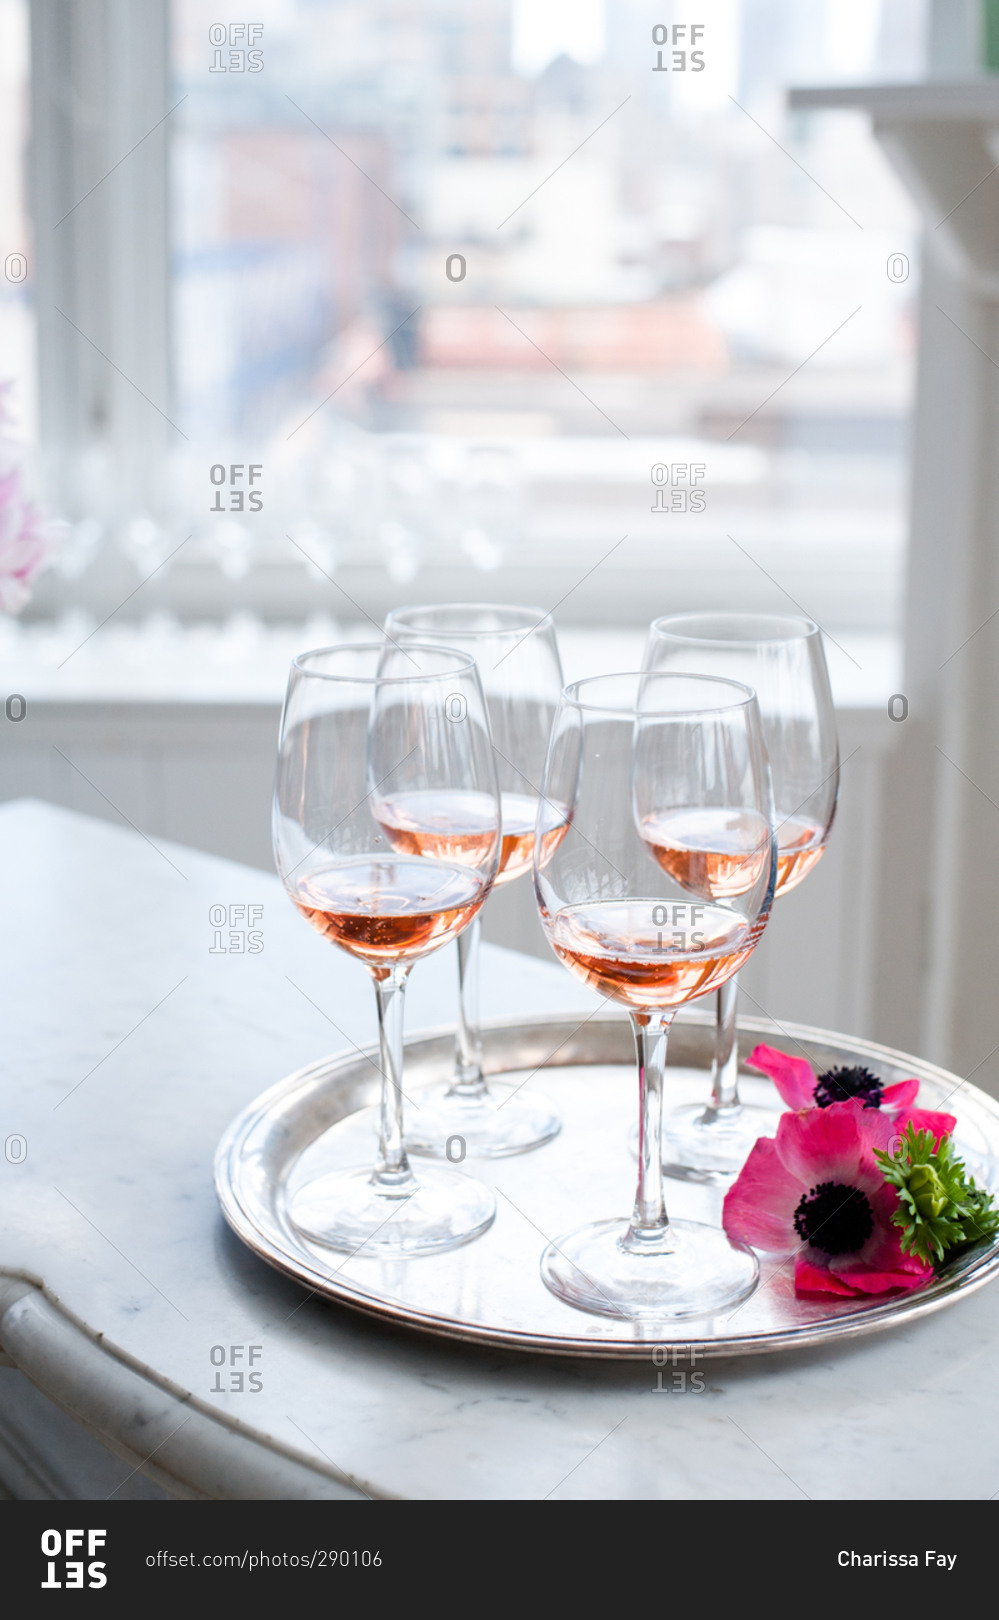 Wine glasses on a serving tray with pink flowers